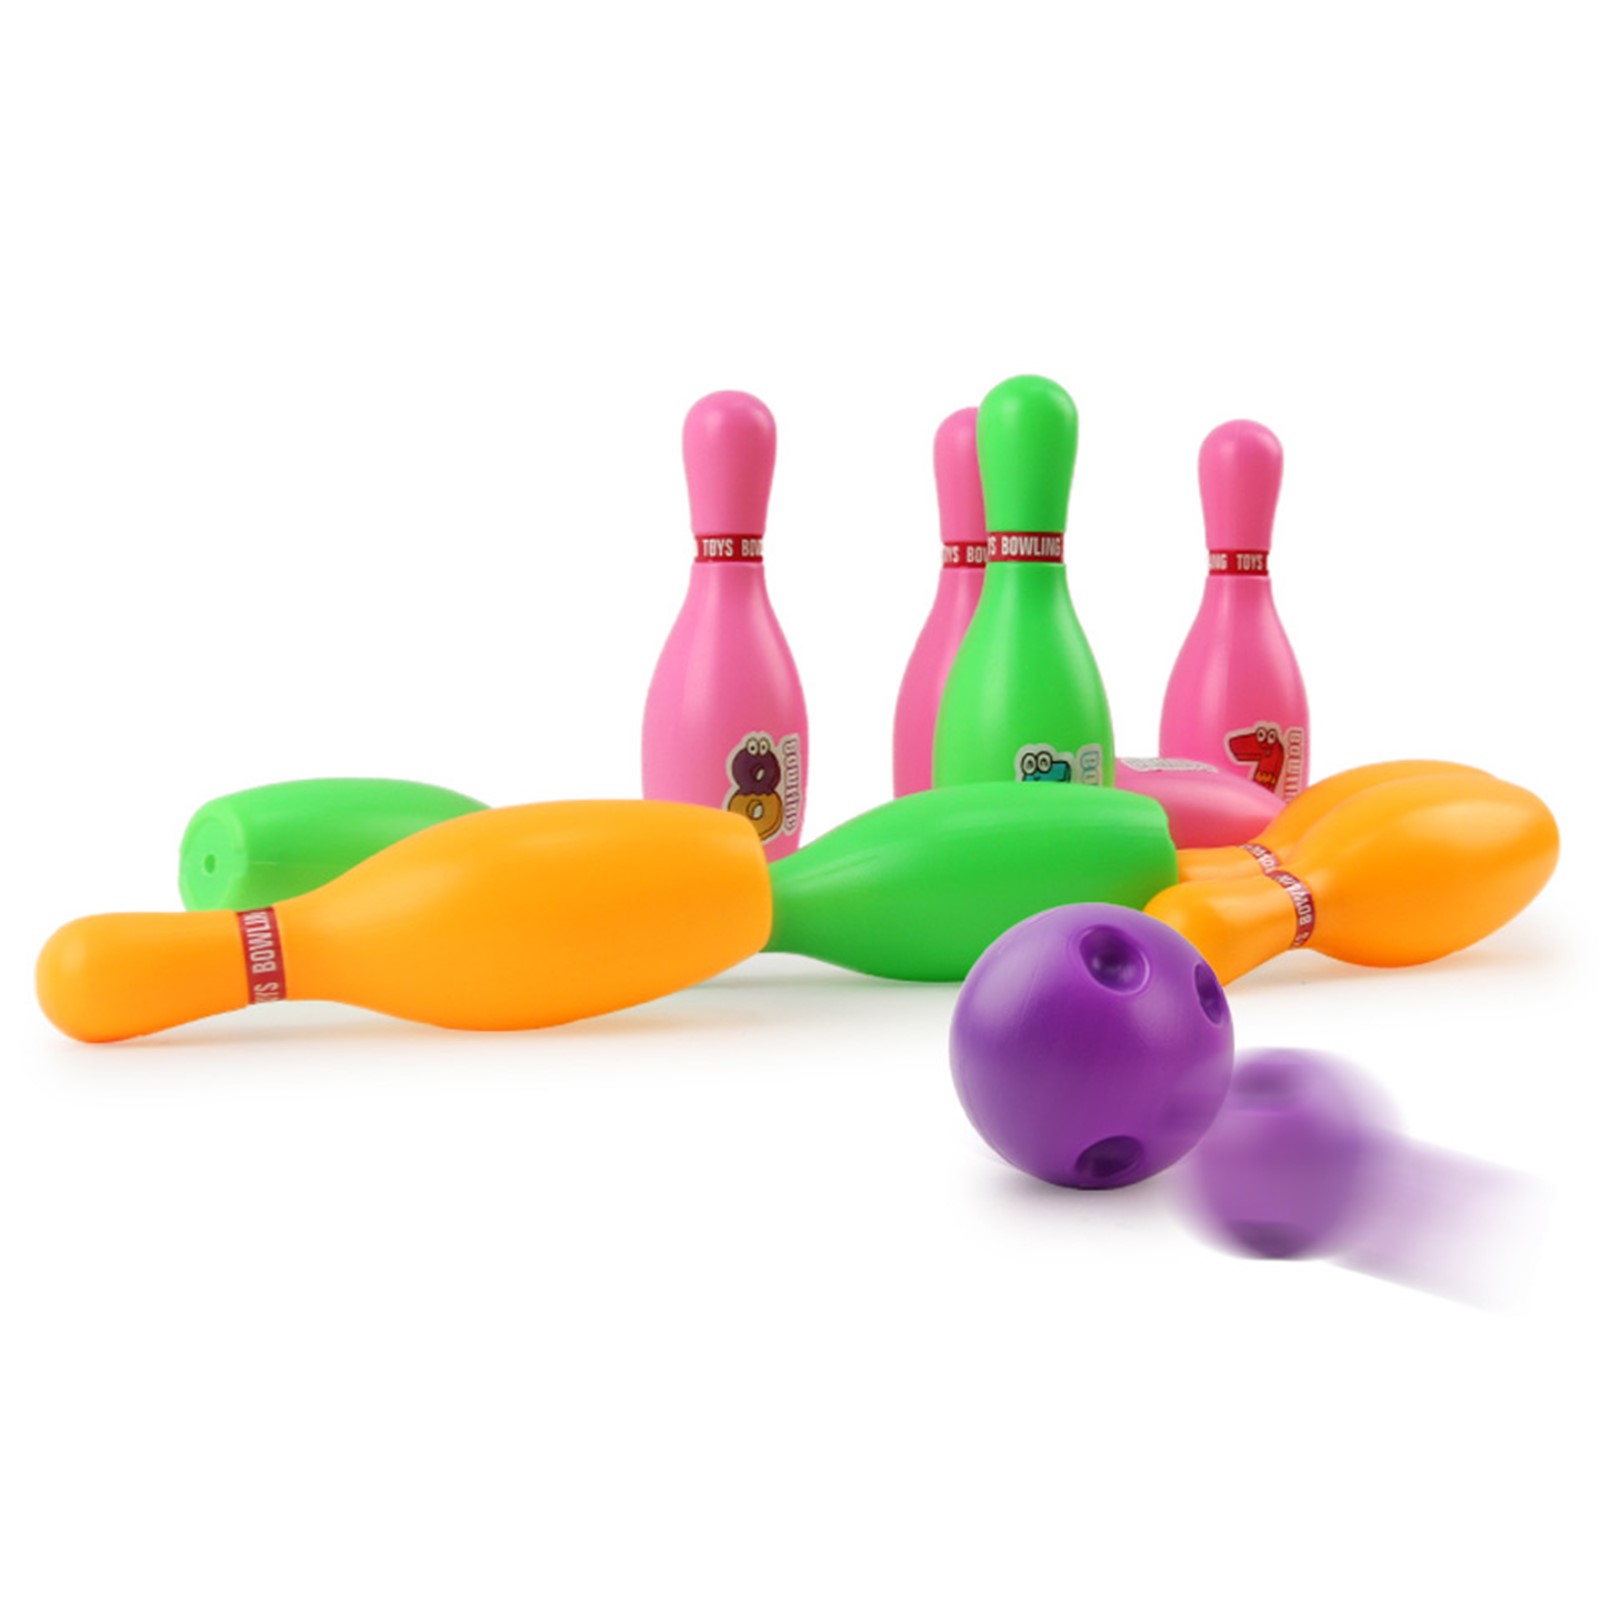 Toy Bowling Play Set Deluxe for Children Colorful 12 Piece 10 Pins 2 Balls Carrying Case Childrens Educational Early Development Sport Safe Game for Ages 2 3 4 5 Year Old Toddlers Unisex boy or girl